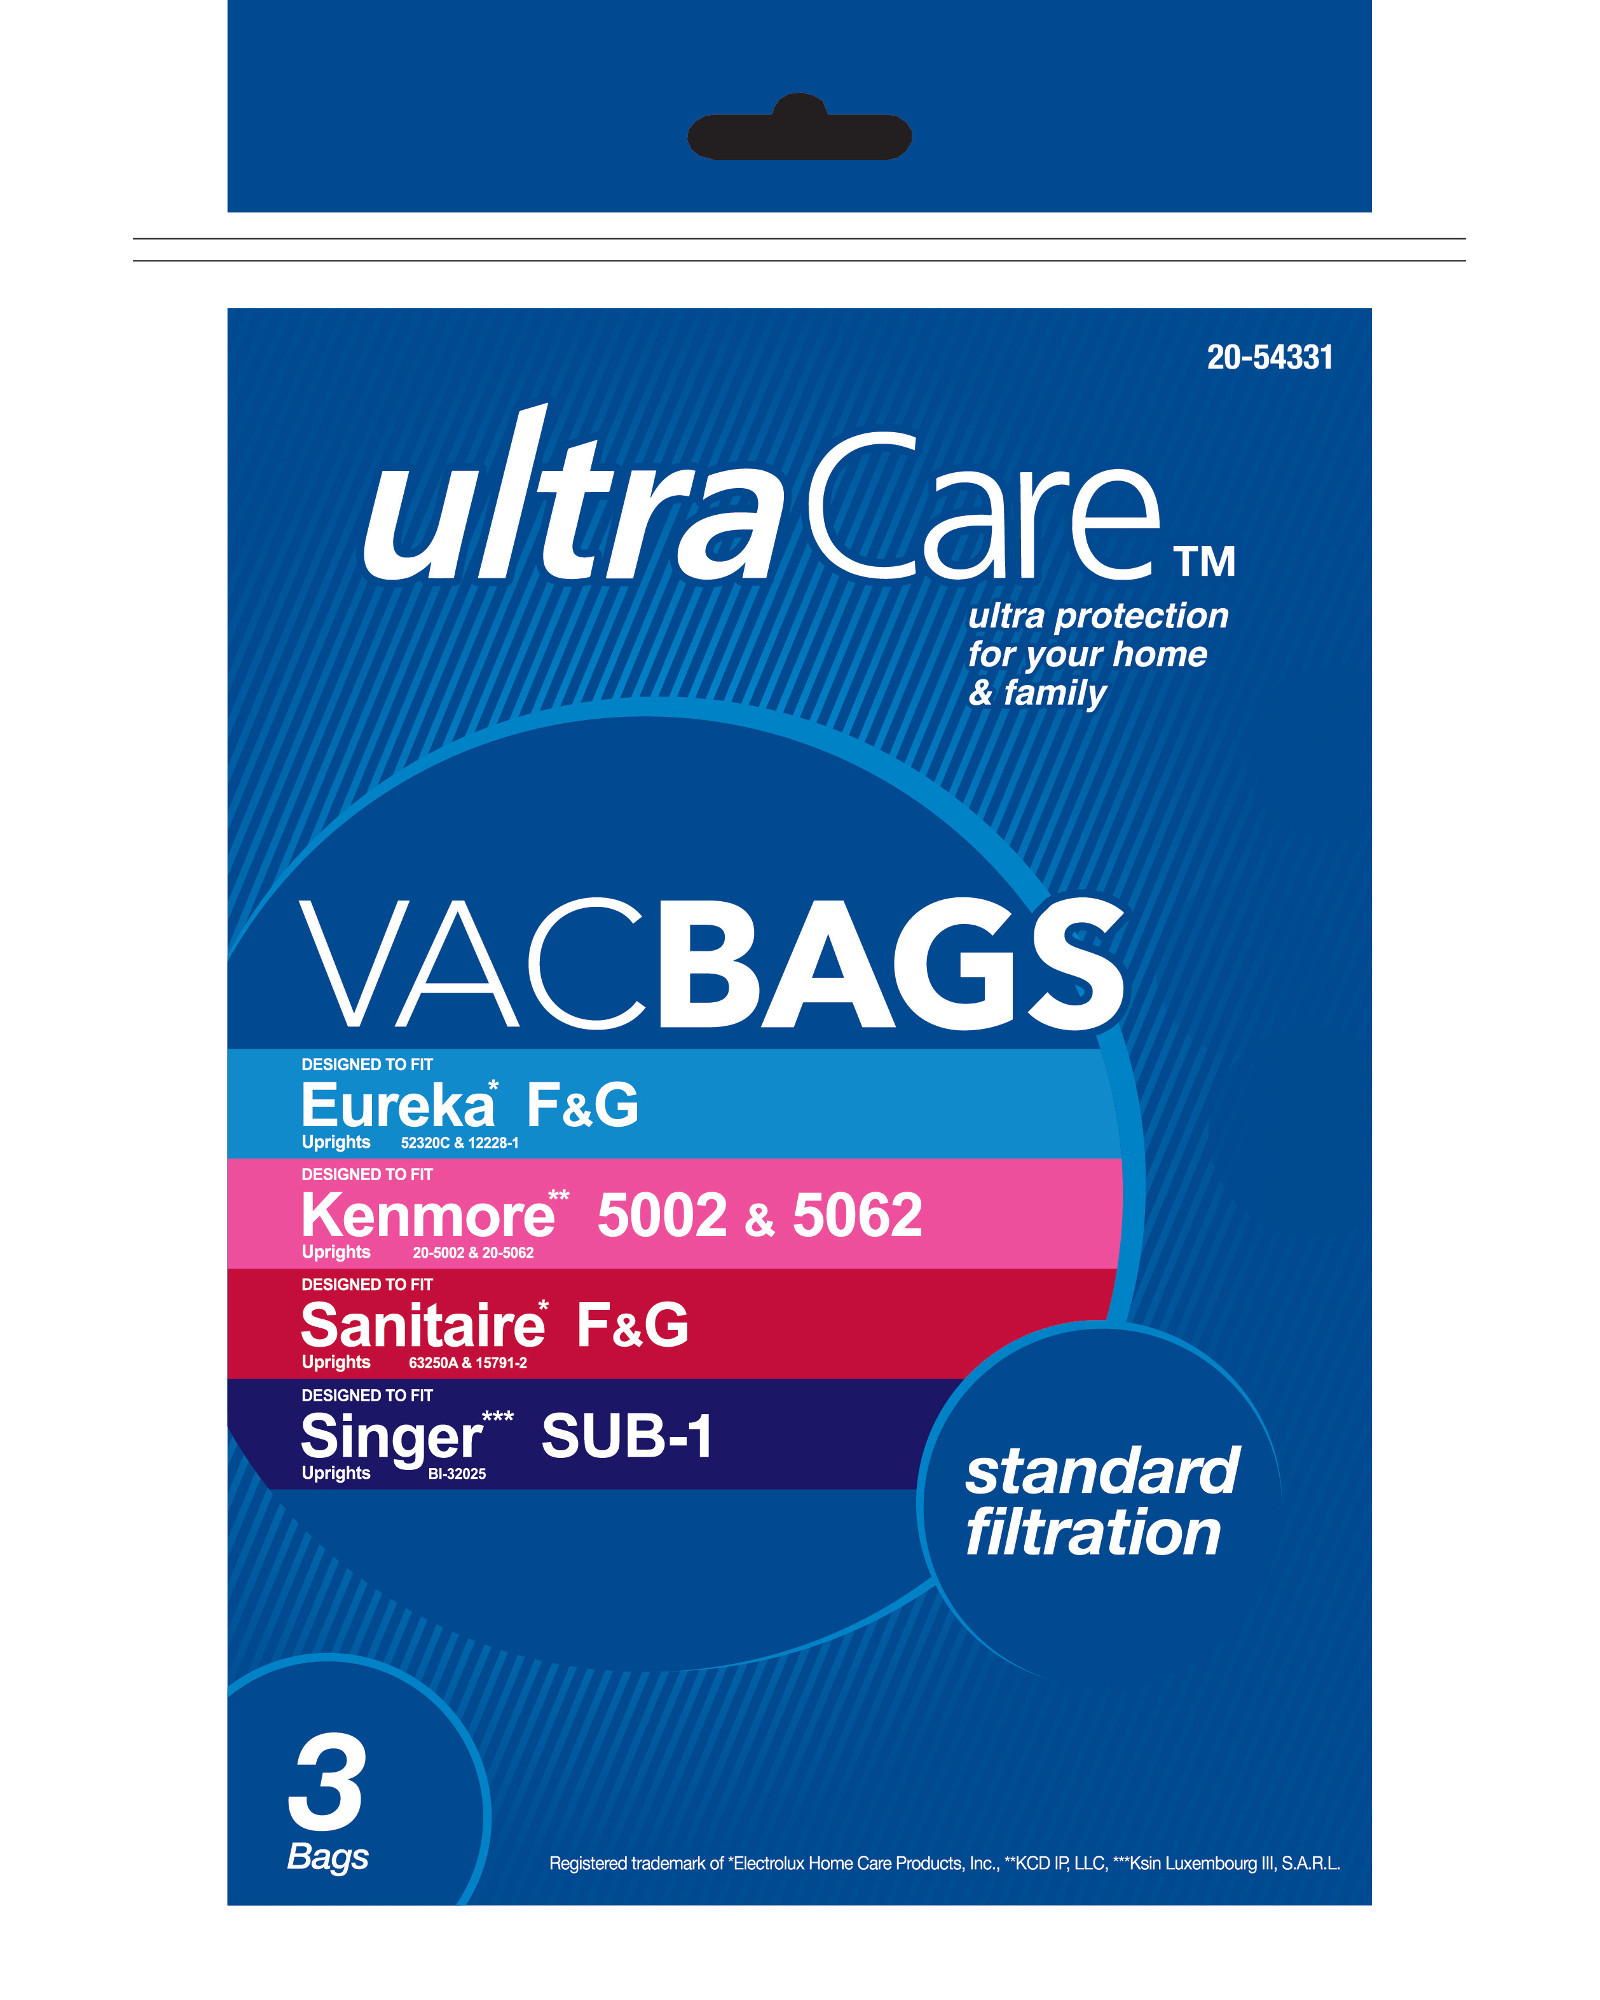 UltraCare UC27715-6  Vacuum Bags for Eureka&#8482; type F & G; Kenmore type 5002 & 5062; Sanitaire type F & G; Singer type SUB-1 Upright - 3 pk